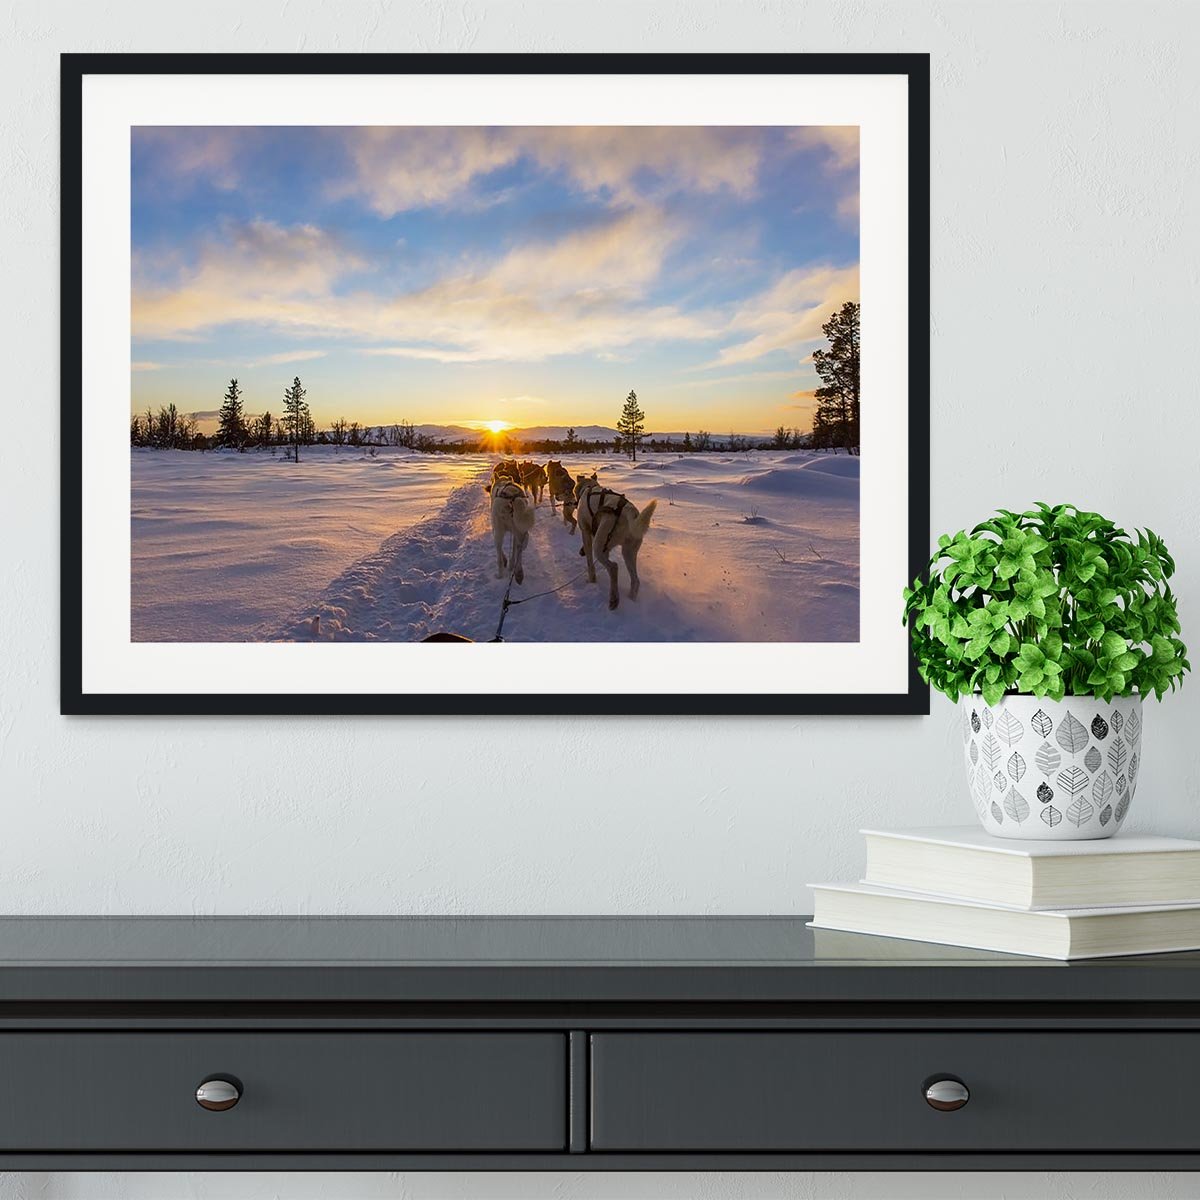 Musher and passenger in a dog sleigh with huskies a cold winter evening Framed Print - Canvas Art Rocks - 1